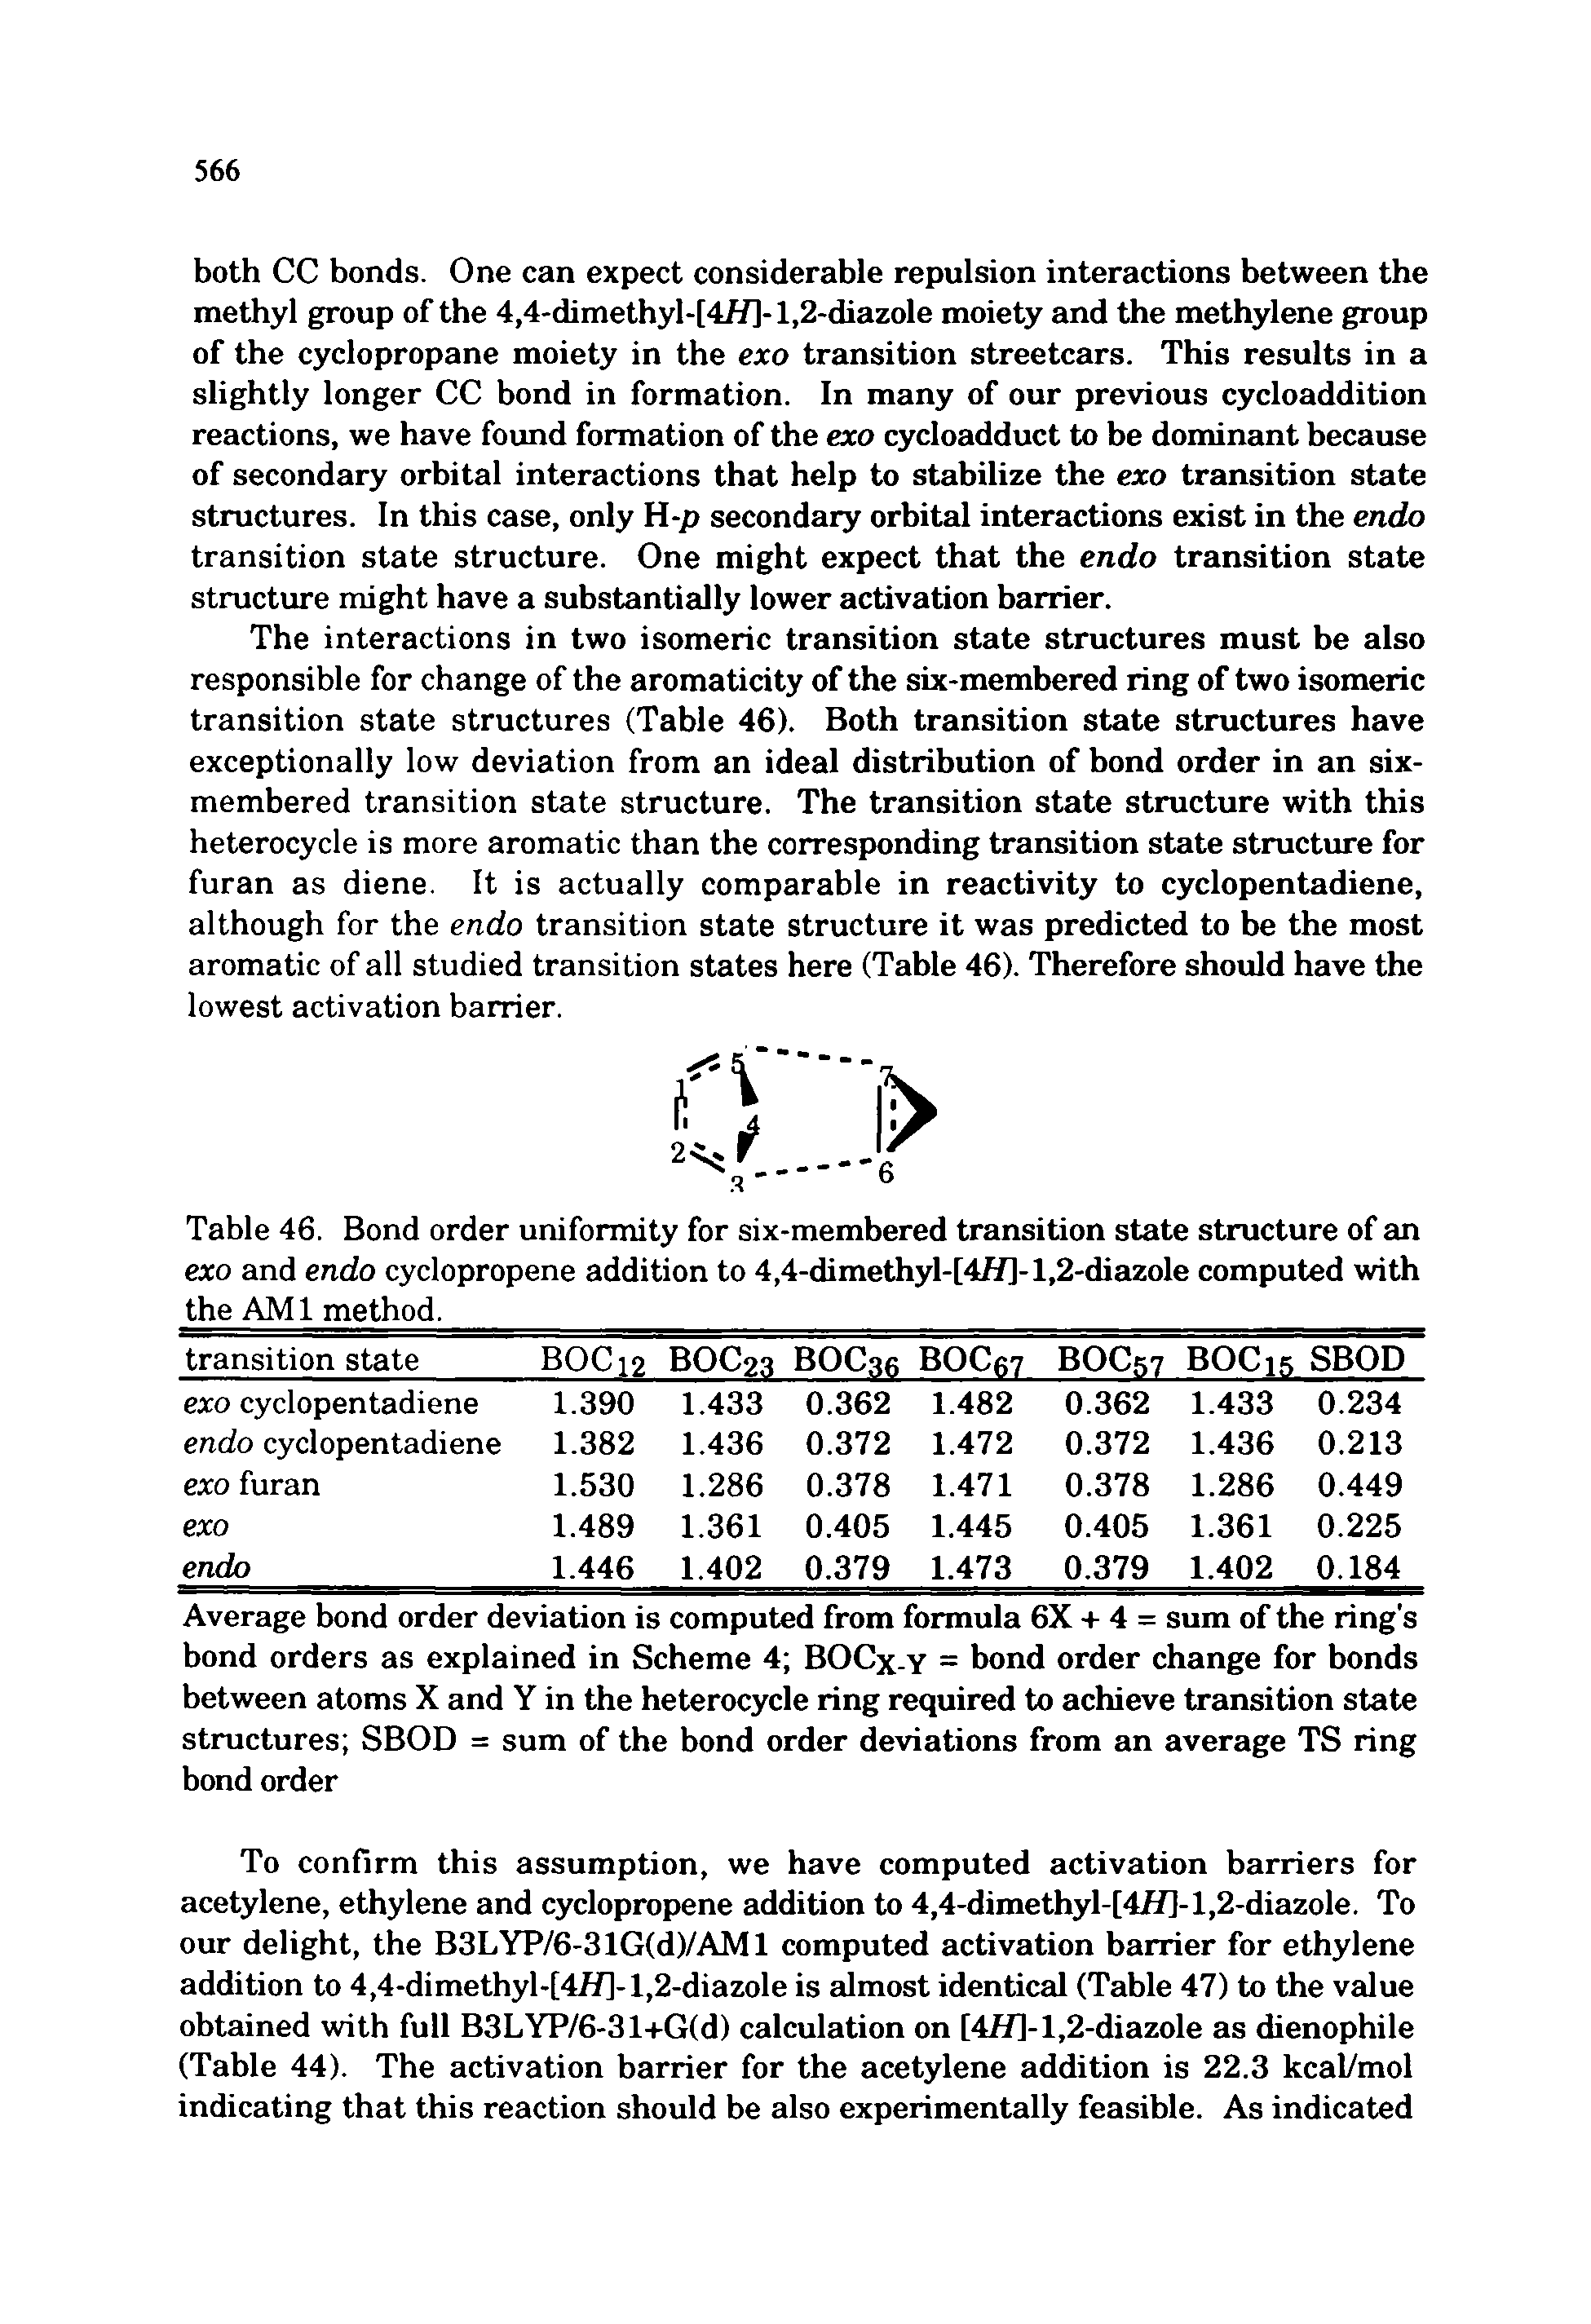 Table 46. Bond order uniformity for six-membered transition state structure of an exo and endo cyclopropene addition to 4,4-dimethyl-[4H]-1,2-diazole computed with the AMI method.